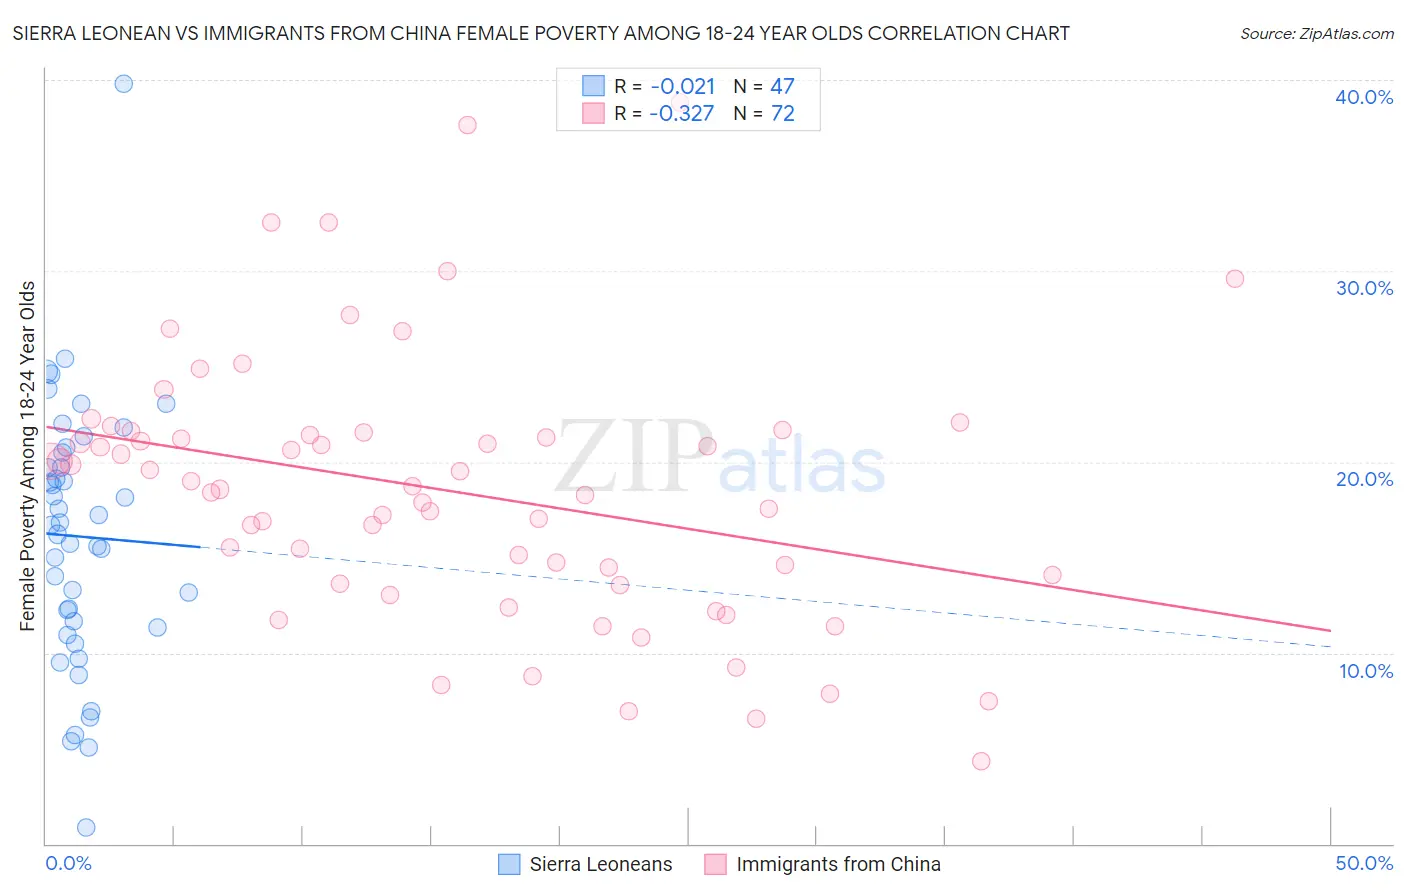 Sierra Leonean vs Immigrants from China Female Poverty Among 18-24 Year Olds